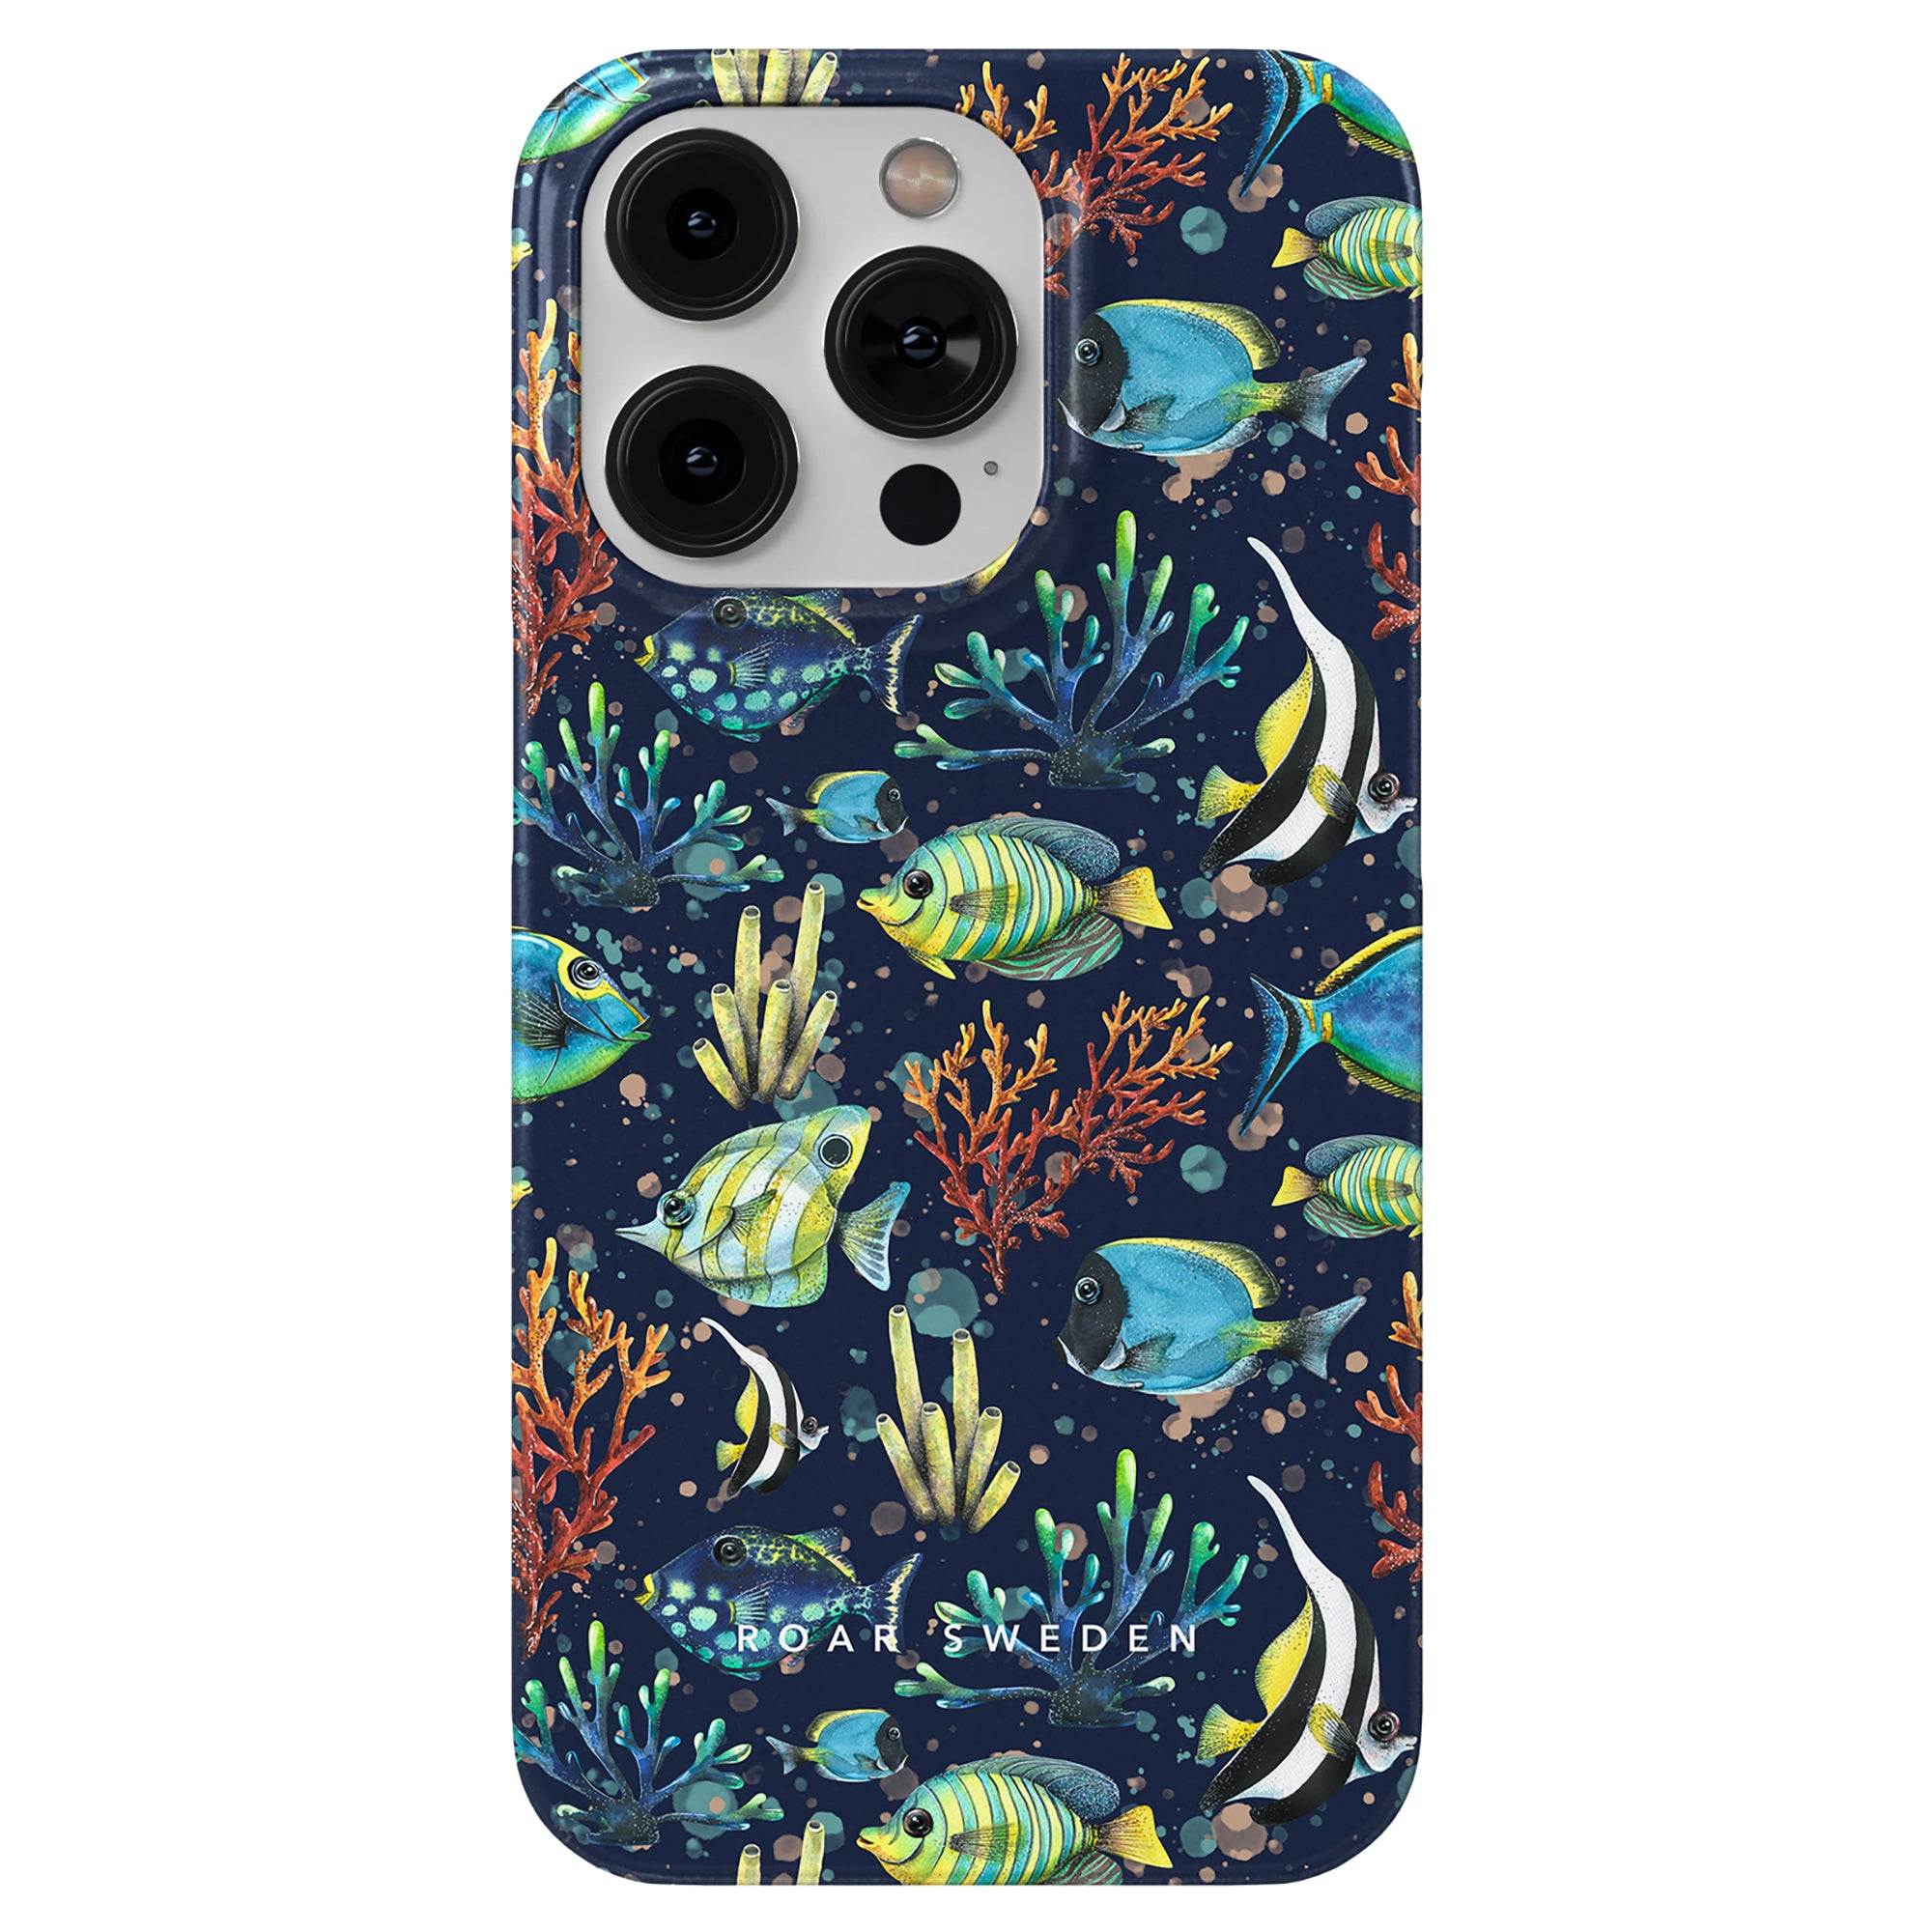 A slim blue Tropical Fish - Slim case adorned with vibrant corals and tropical fish.